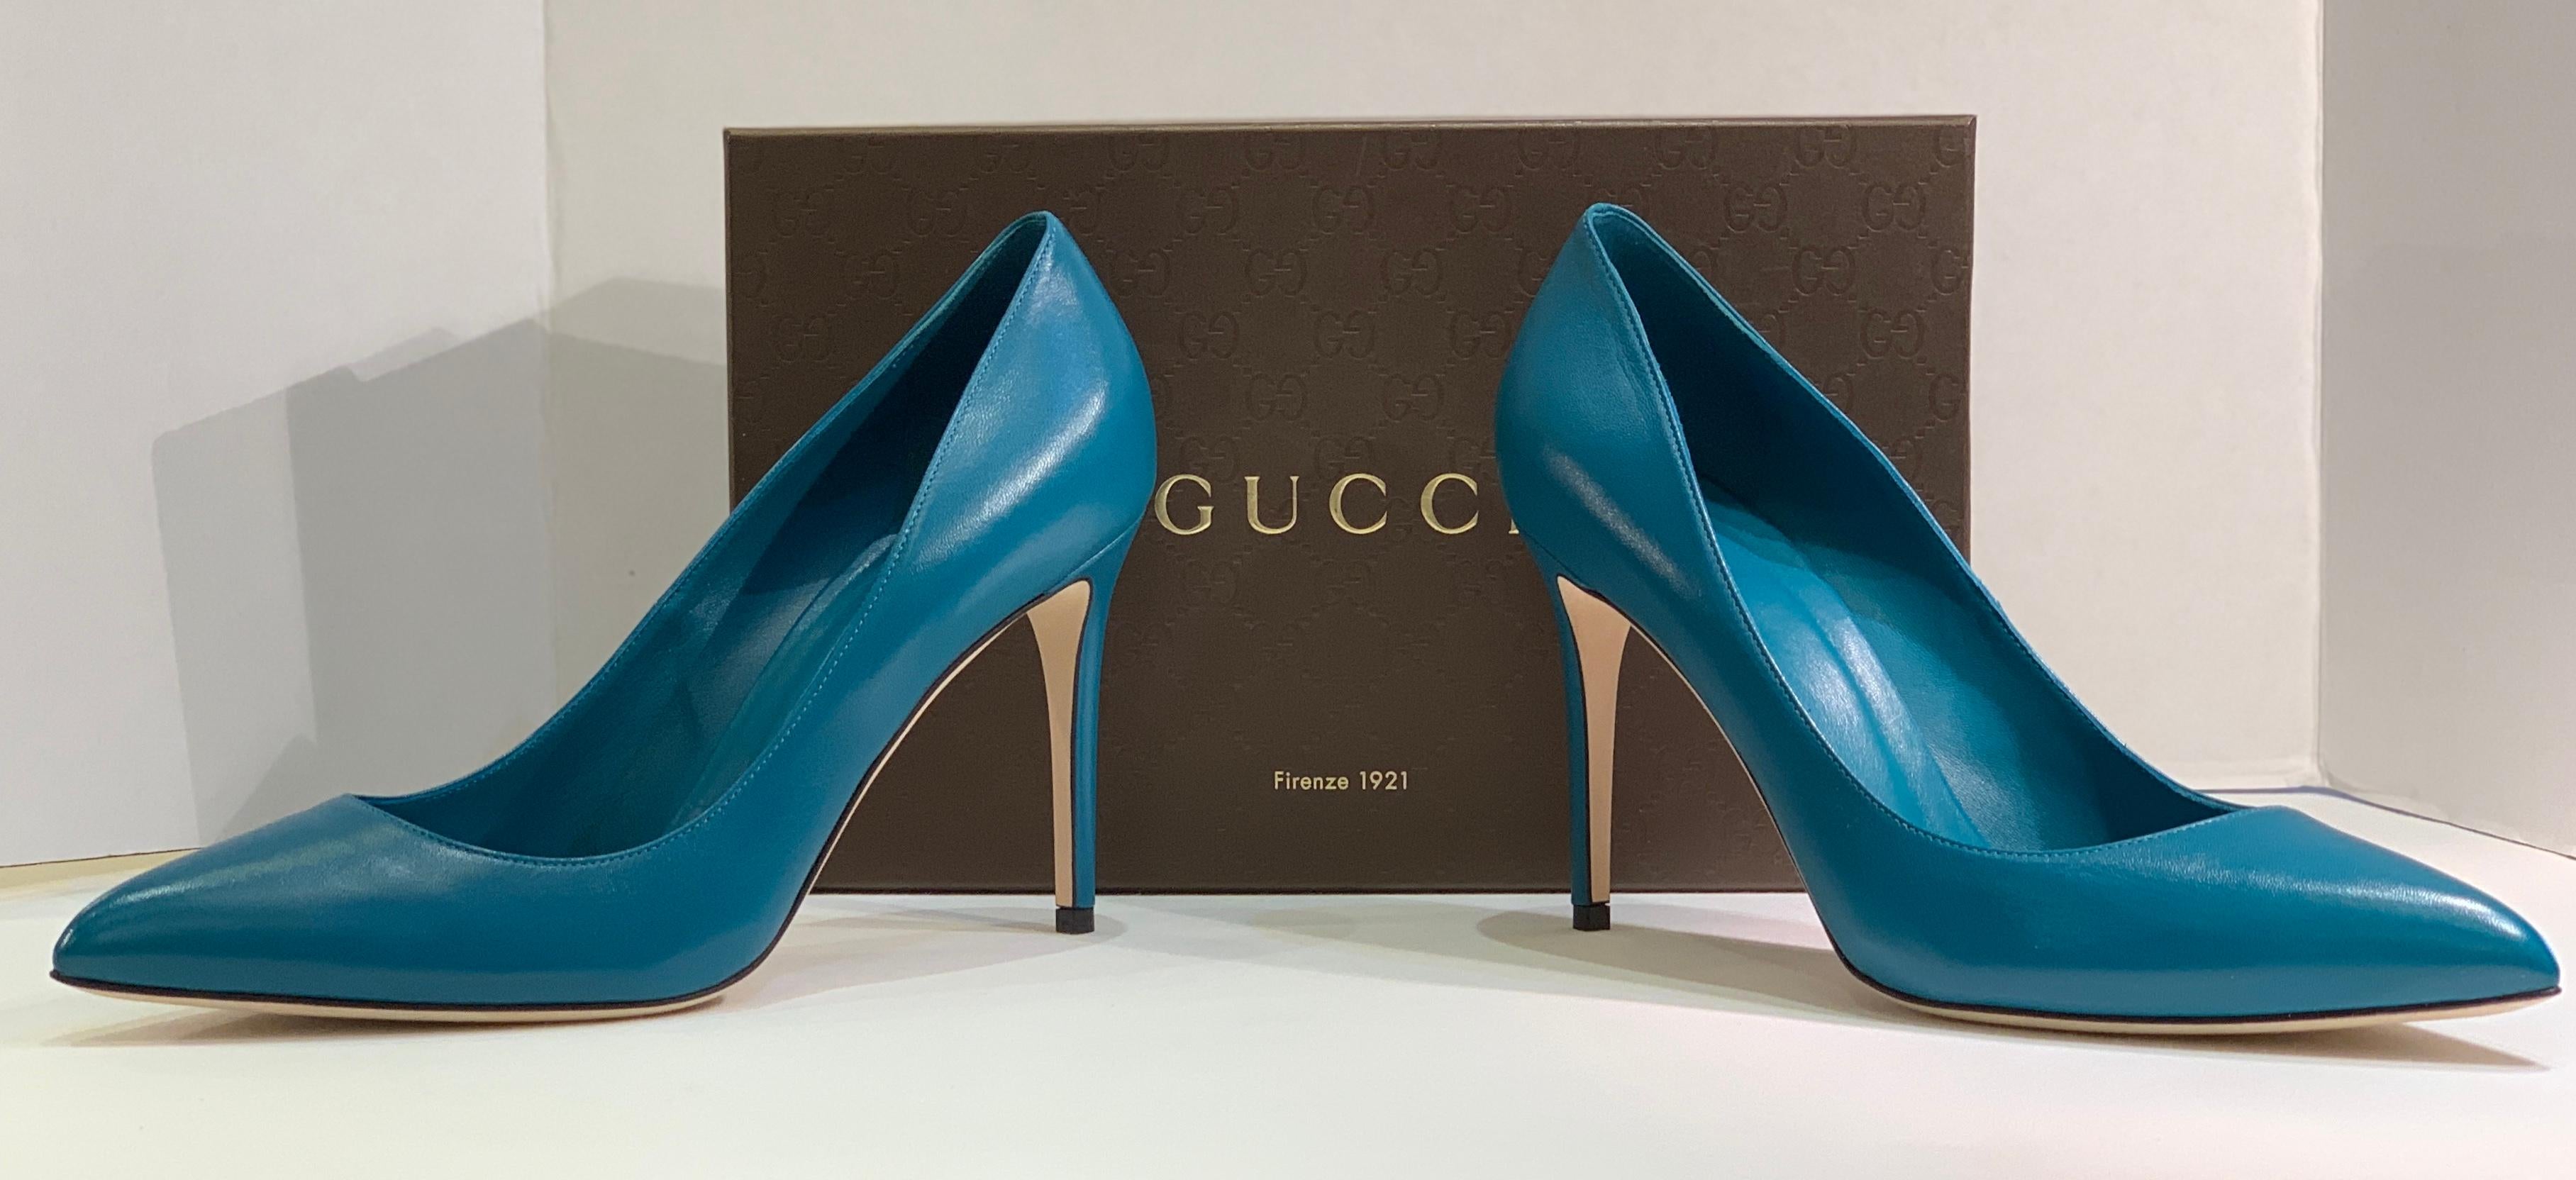 Classic GUCCI closed toe, spiked high heeled pumps in Malaga kid leather, 